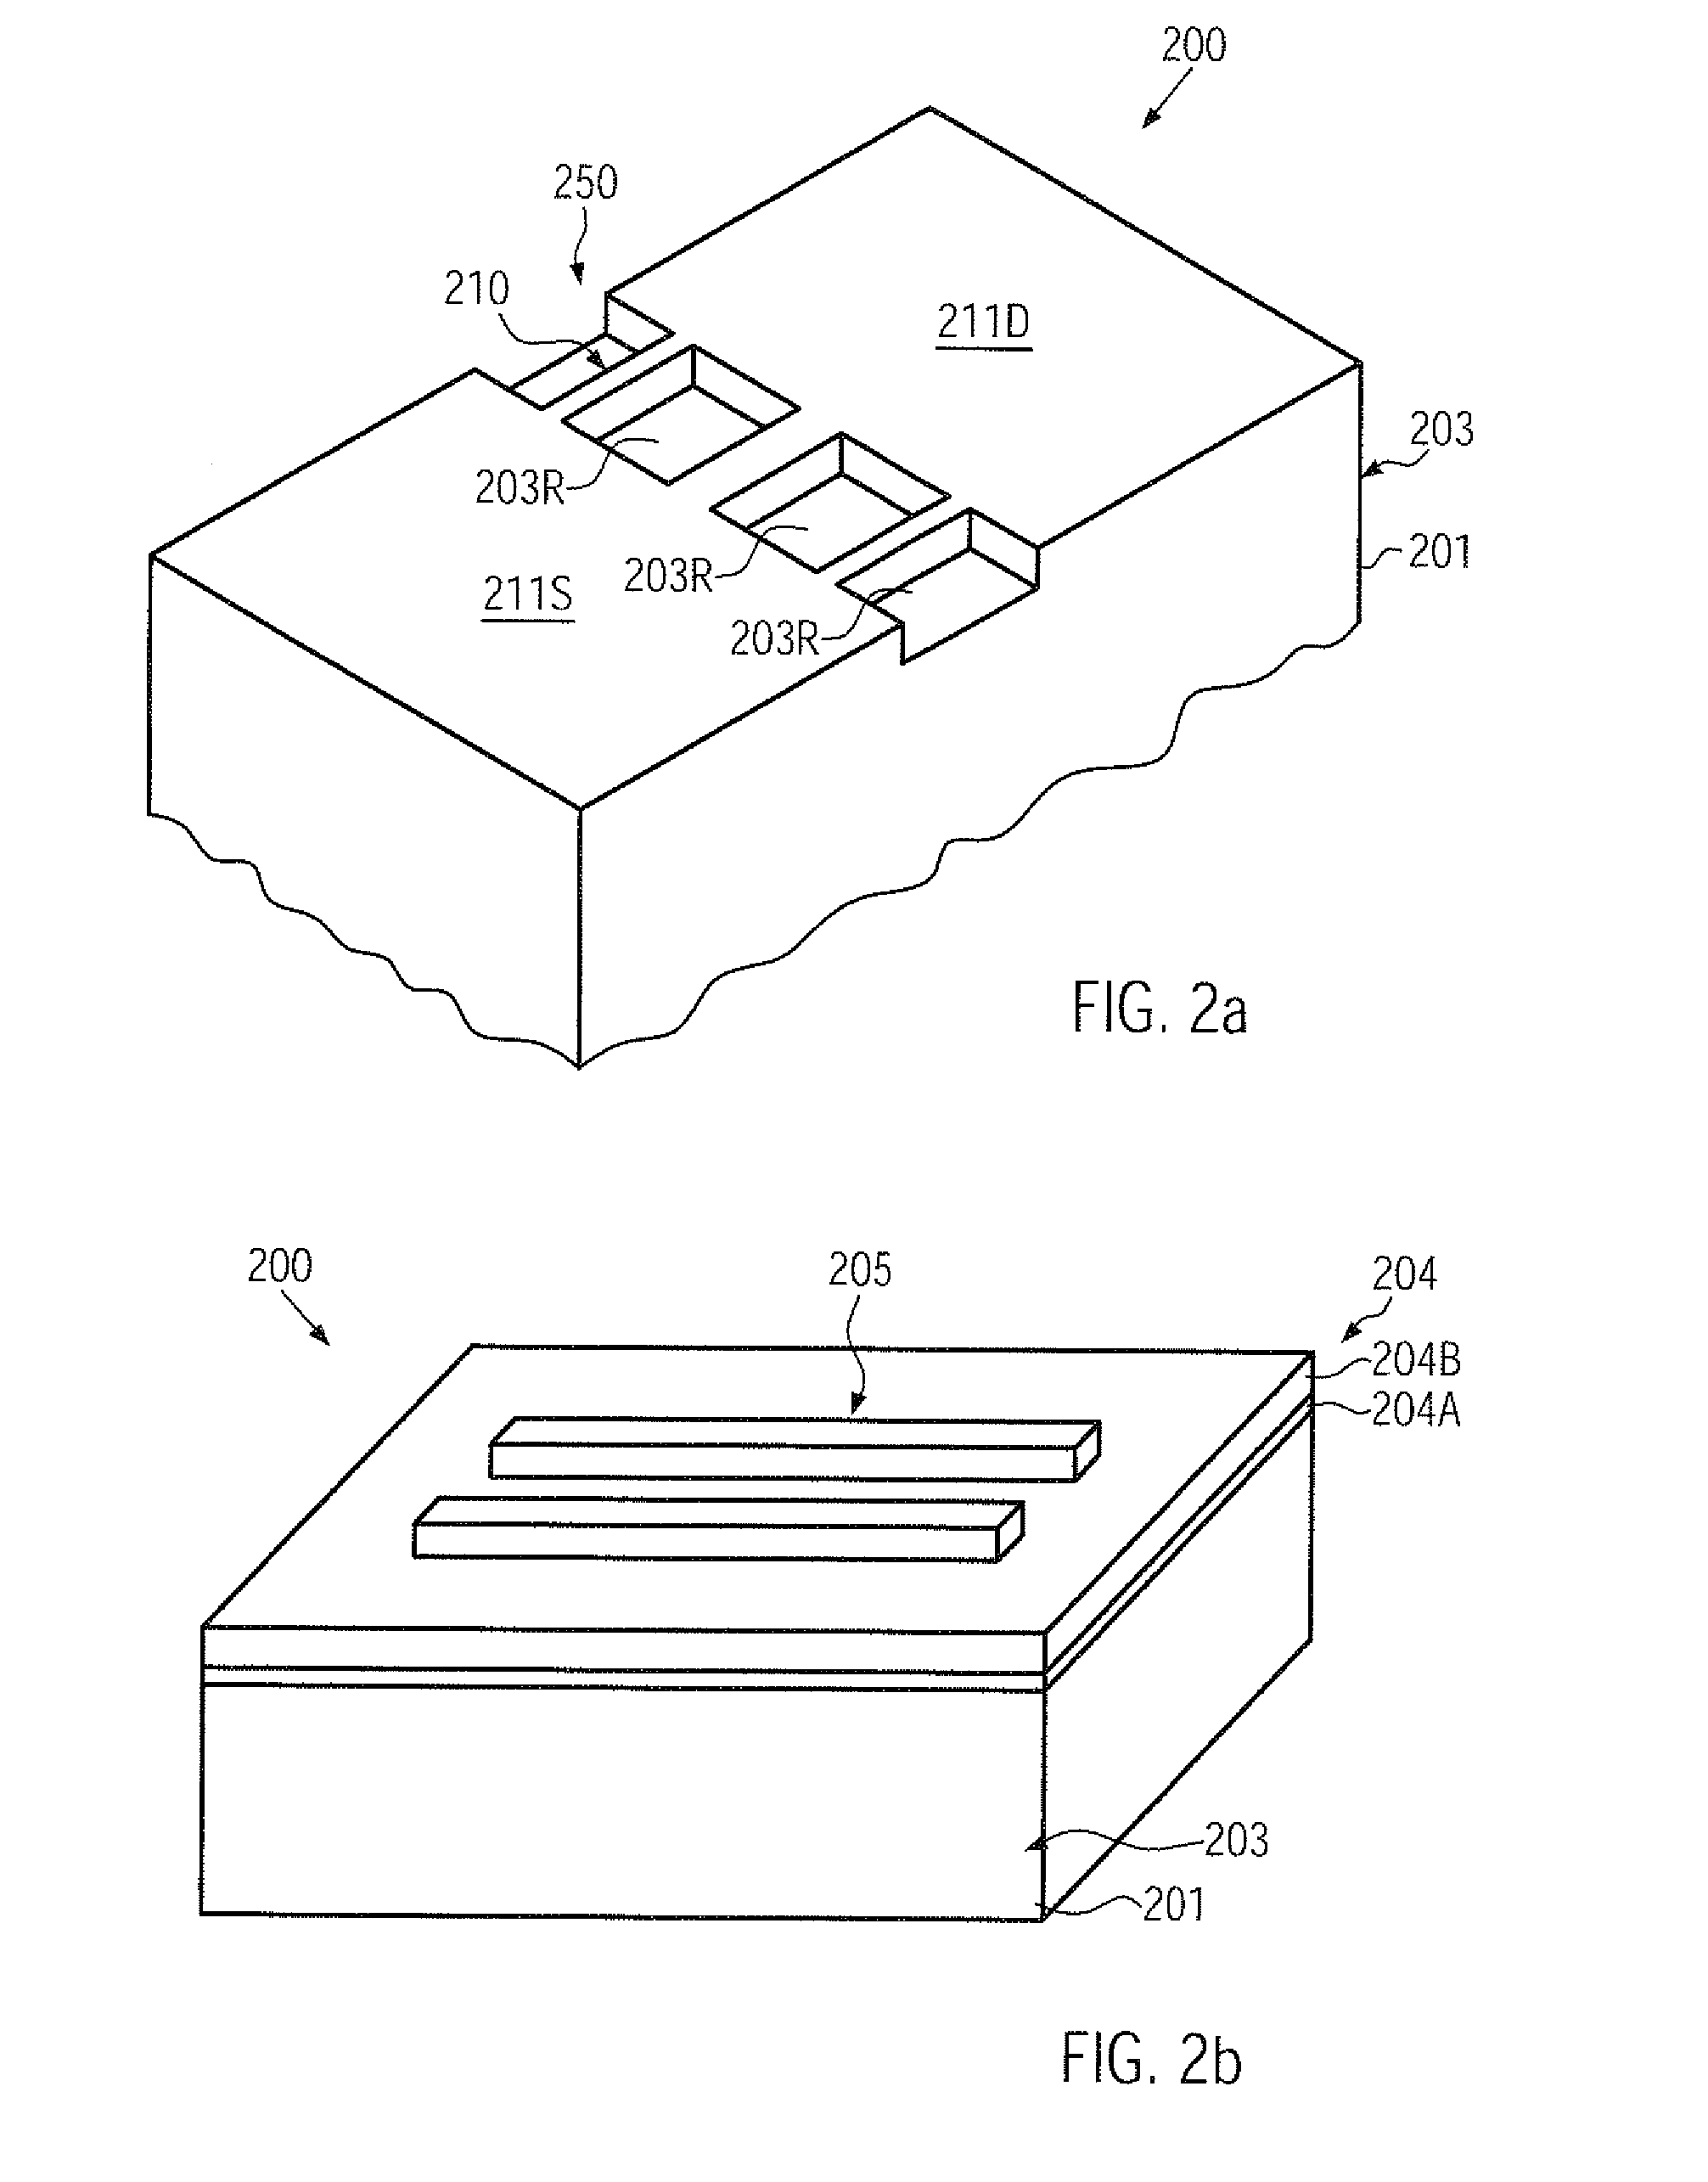 Method for forming double gate and tri-gate transistors on a bulk substrate